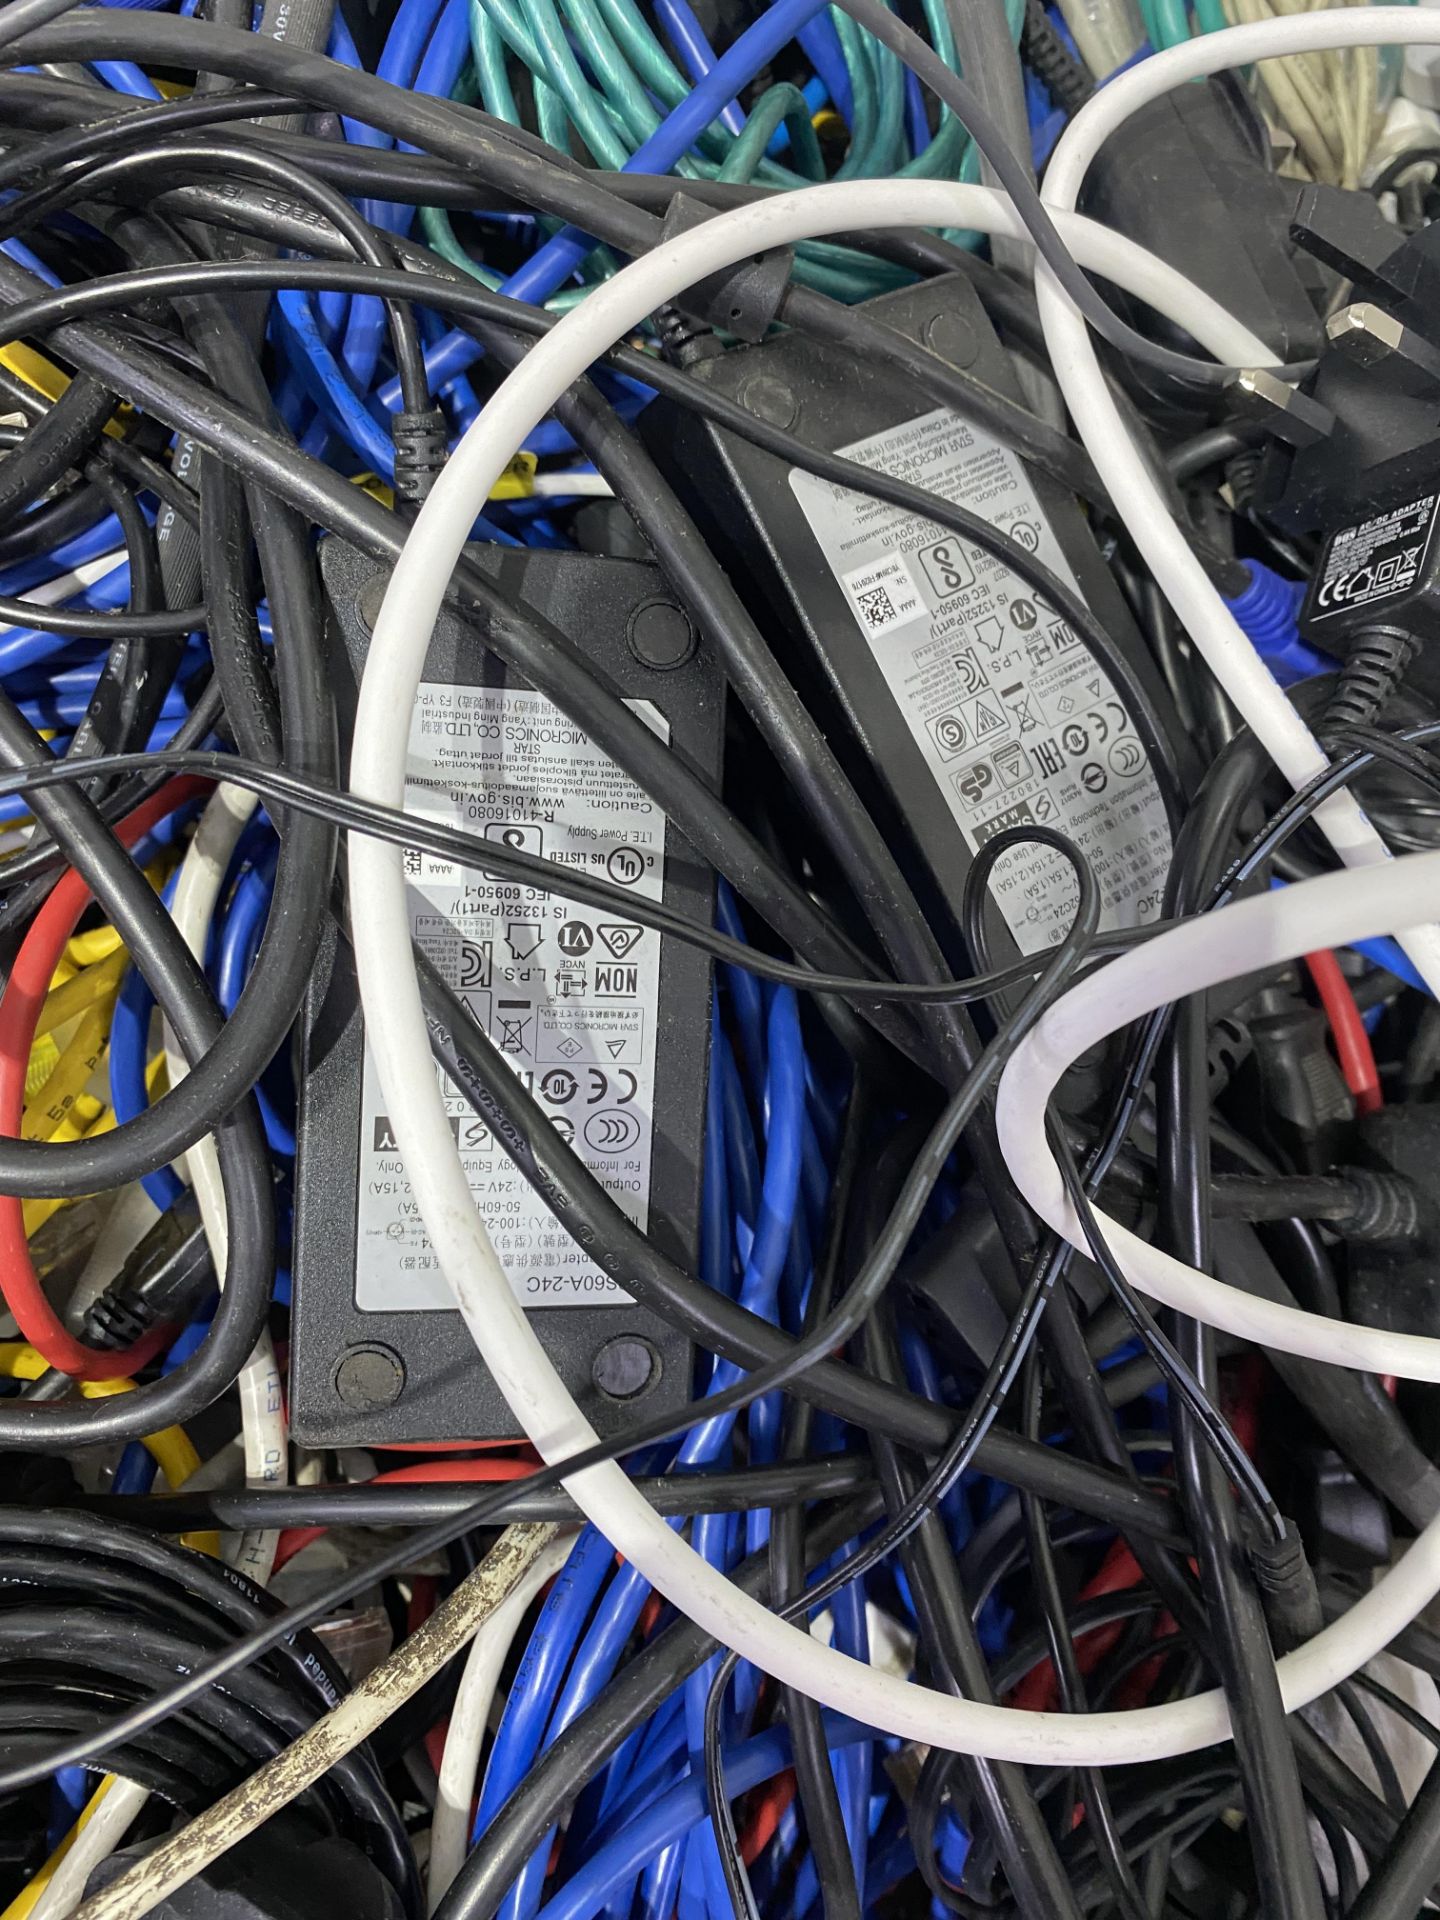 Large Quantity Of Various Electronic Wires, 140kg Bag - Image 11 of 12